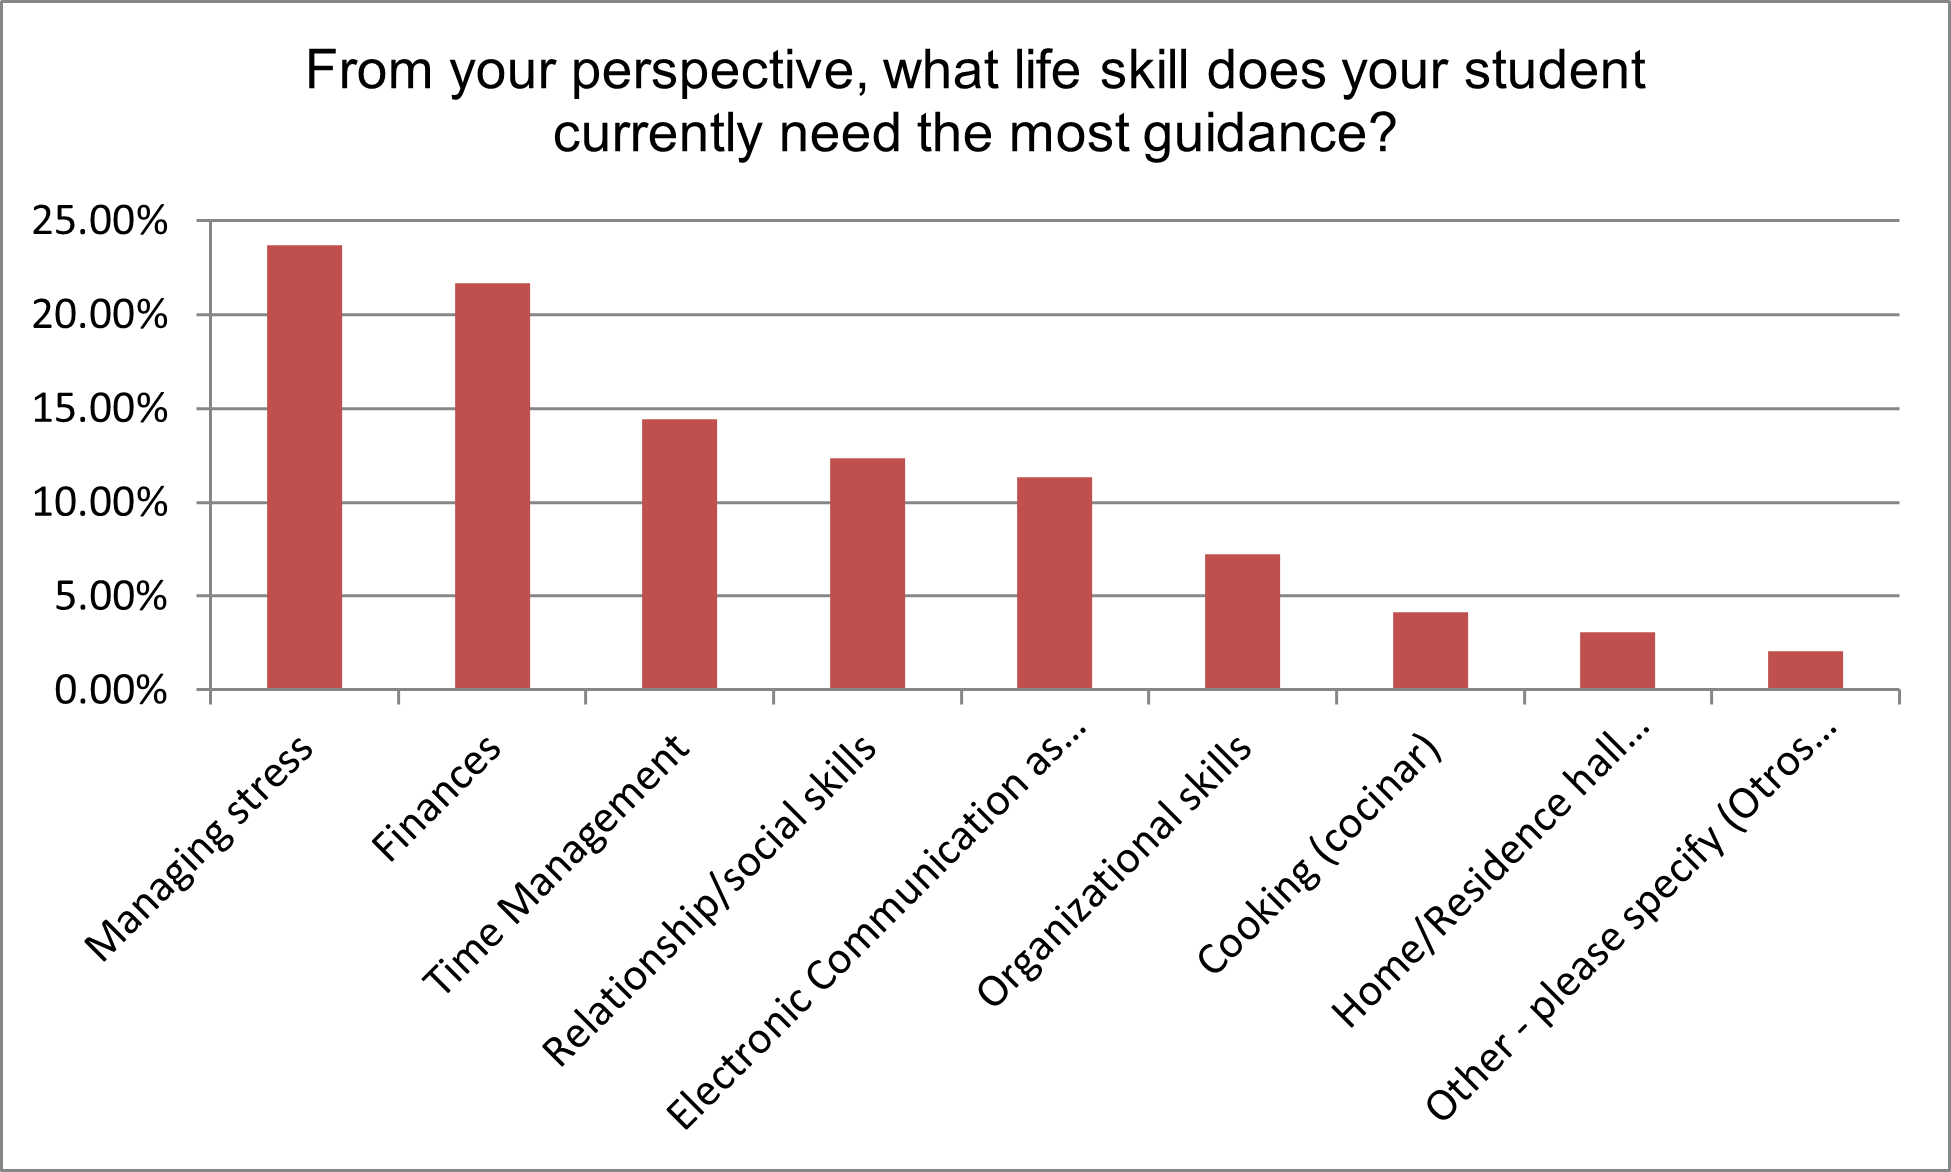 Chart showing top needed student life skills 1) managing stress 2) Finances 3) time management 4) relationship and social skills